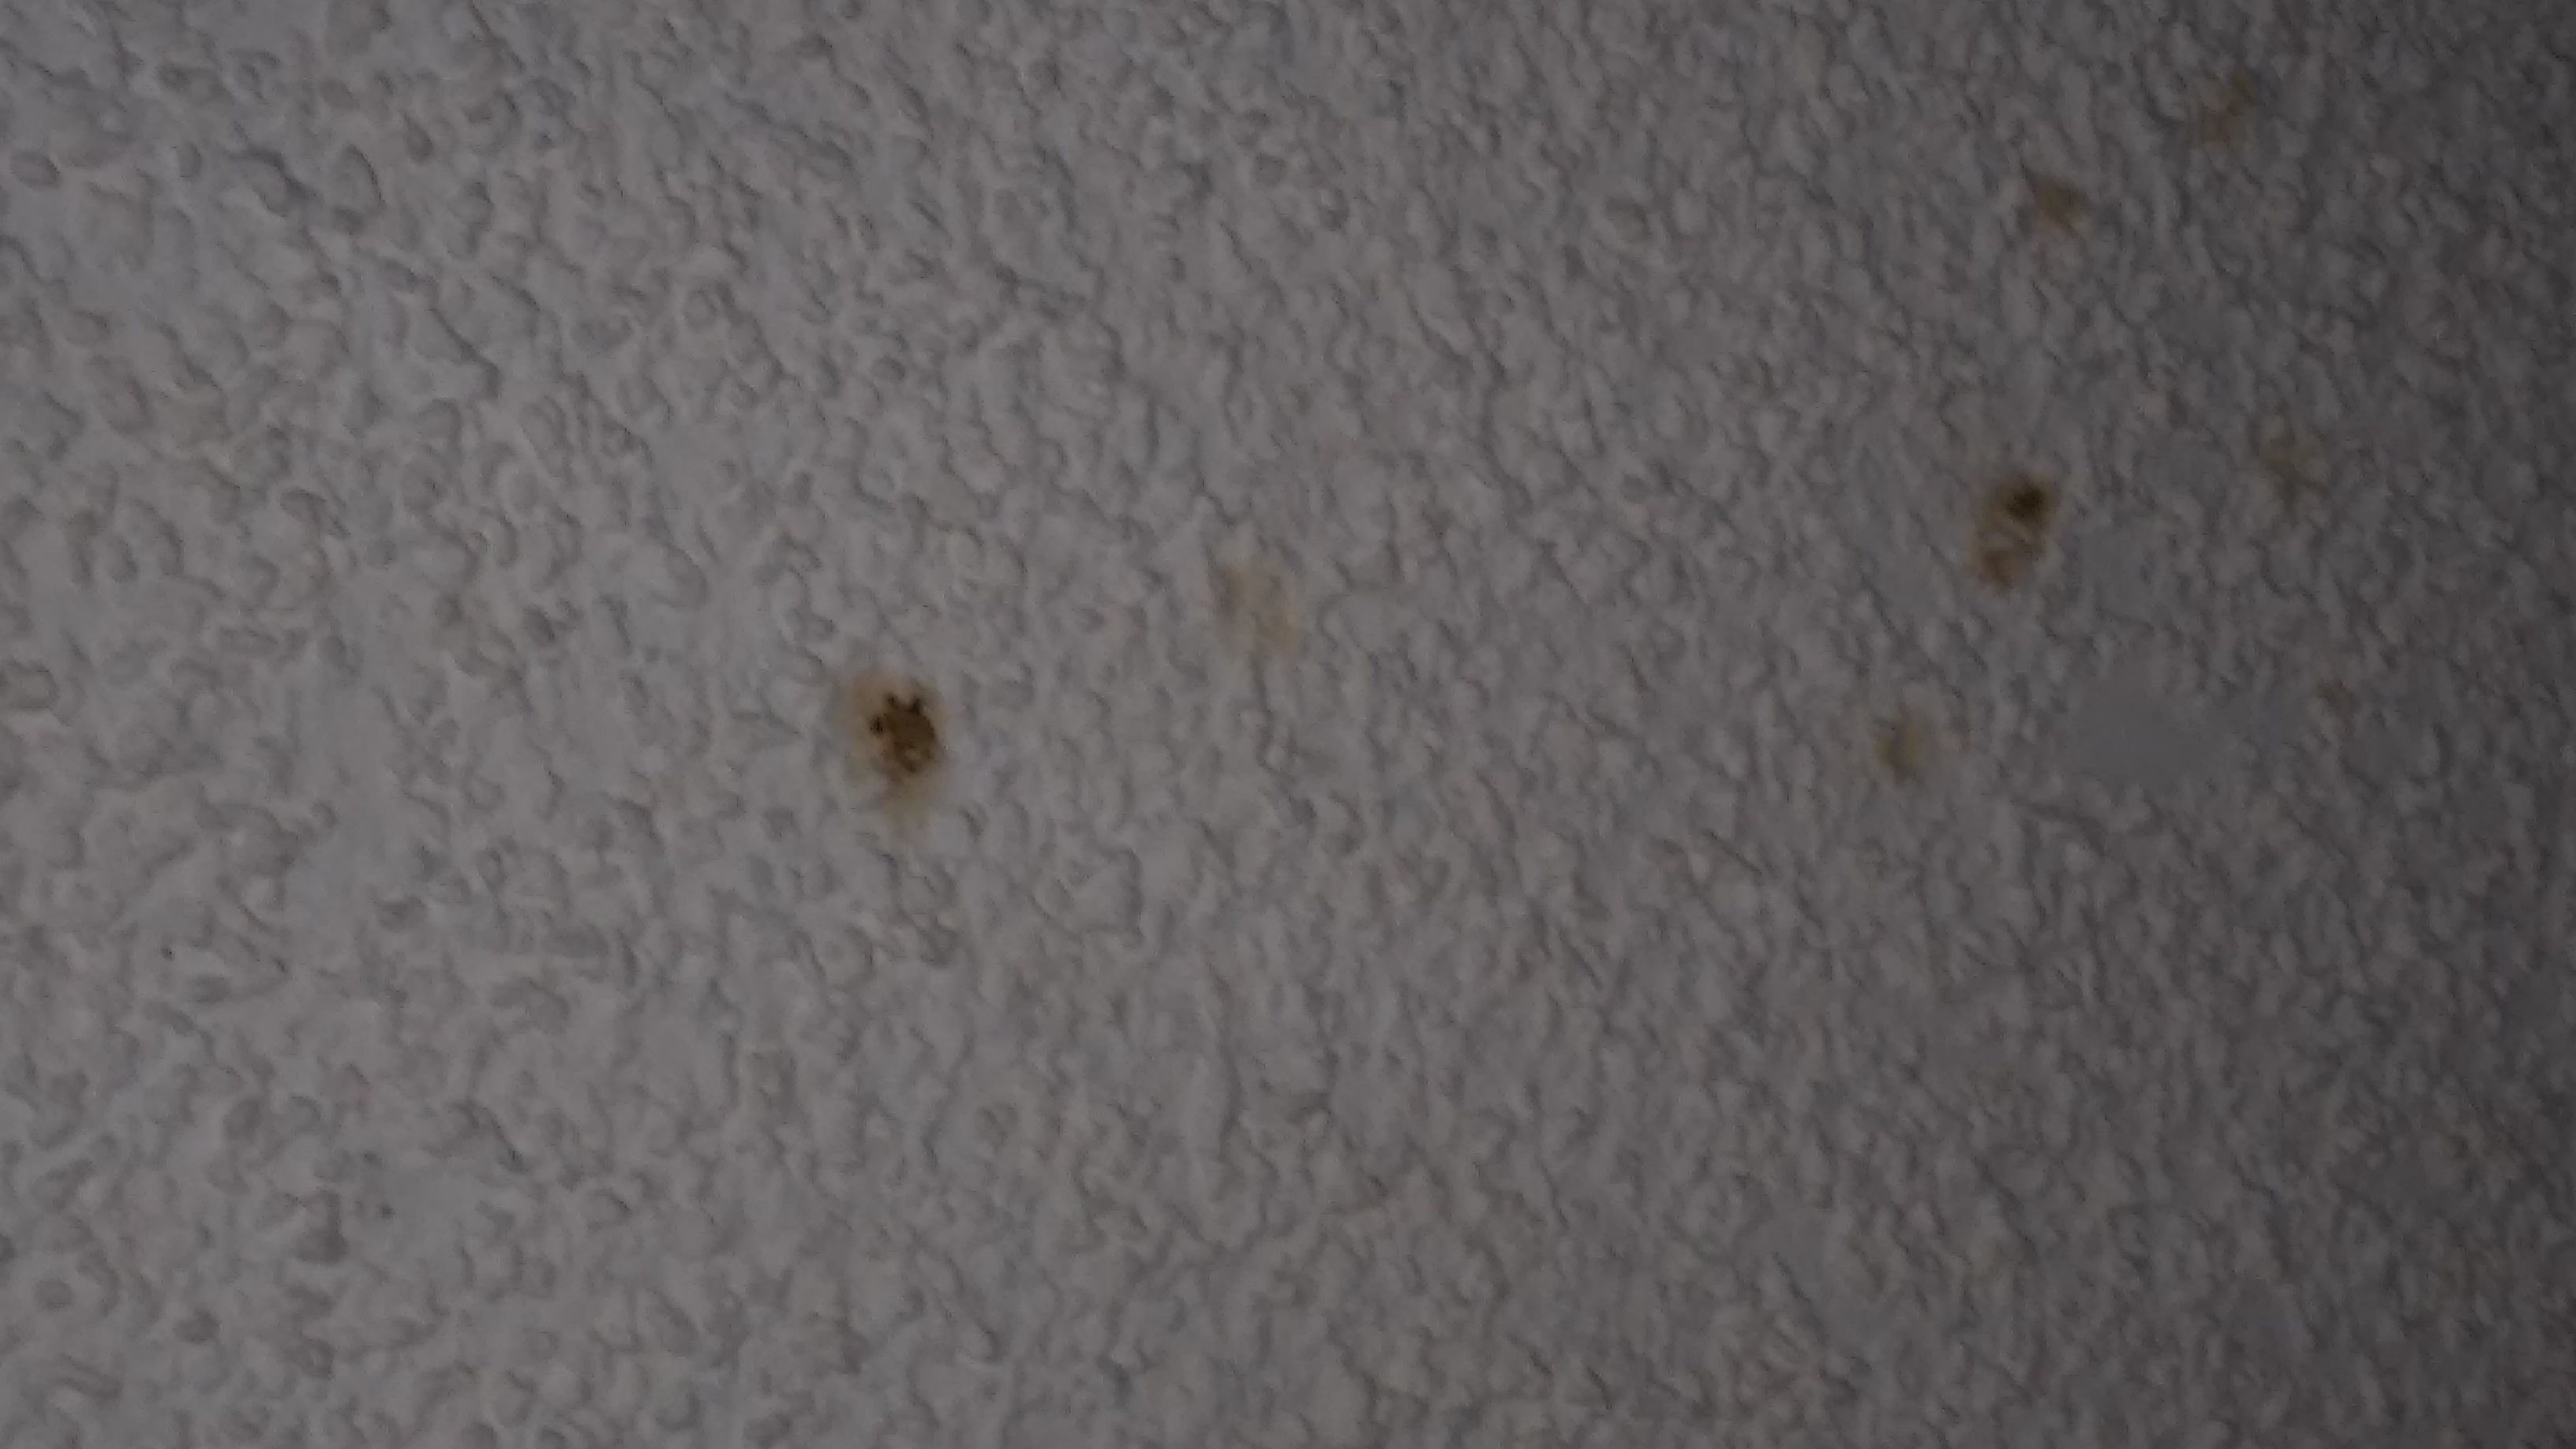 Growing stains on living room ceiling... also stains on kitchen ceiling. BOTH areas were stained when we moved in. 